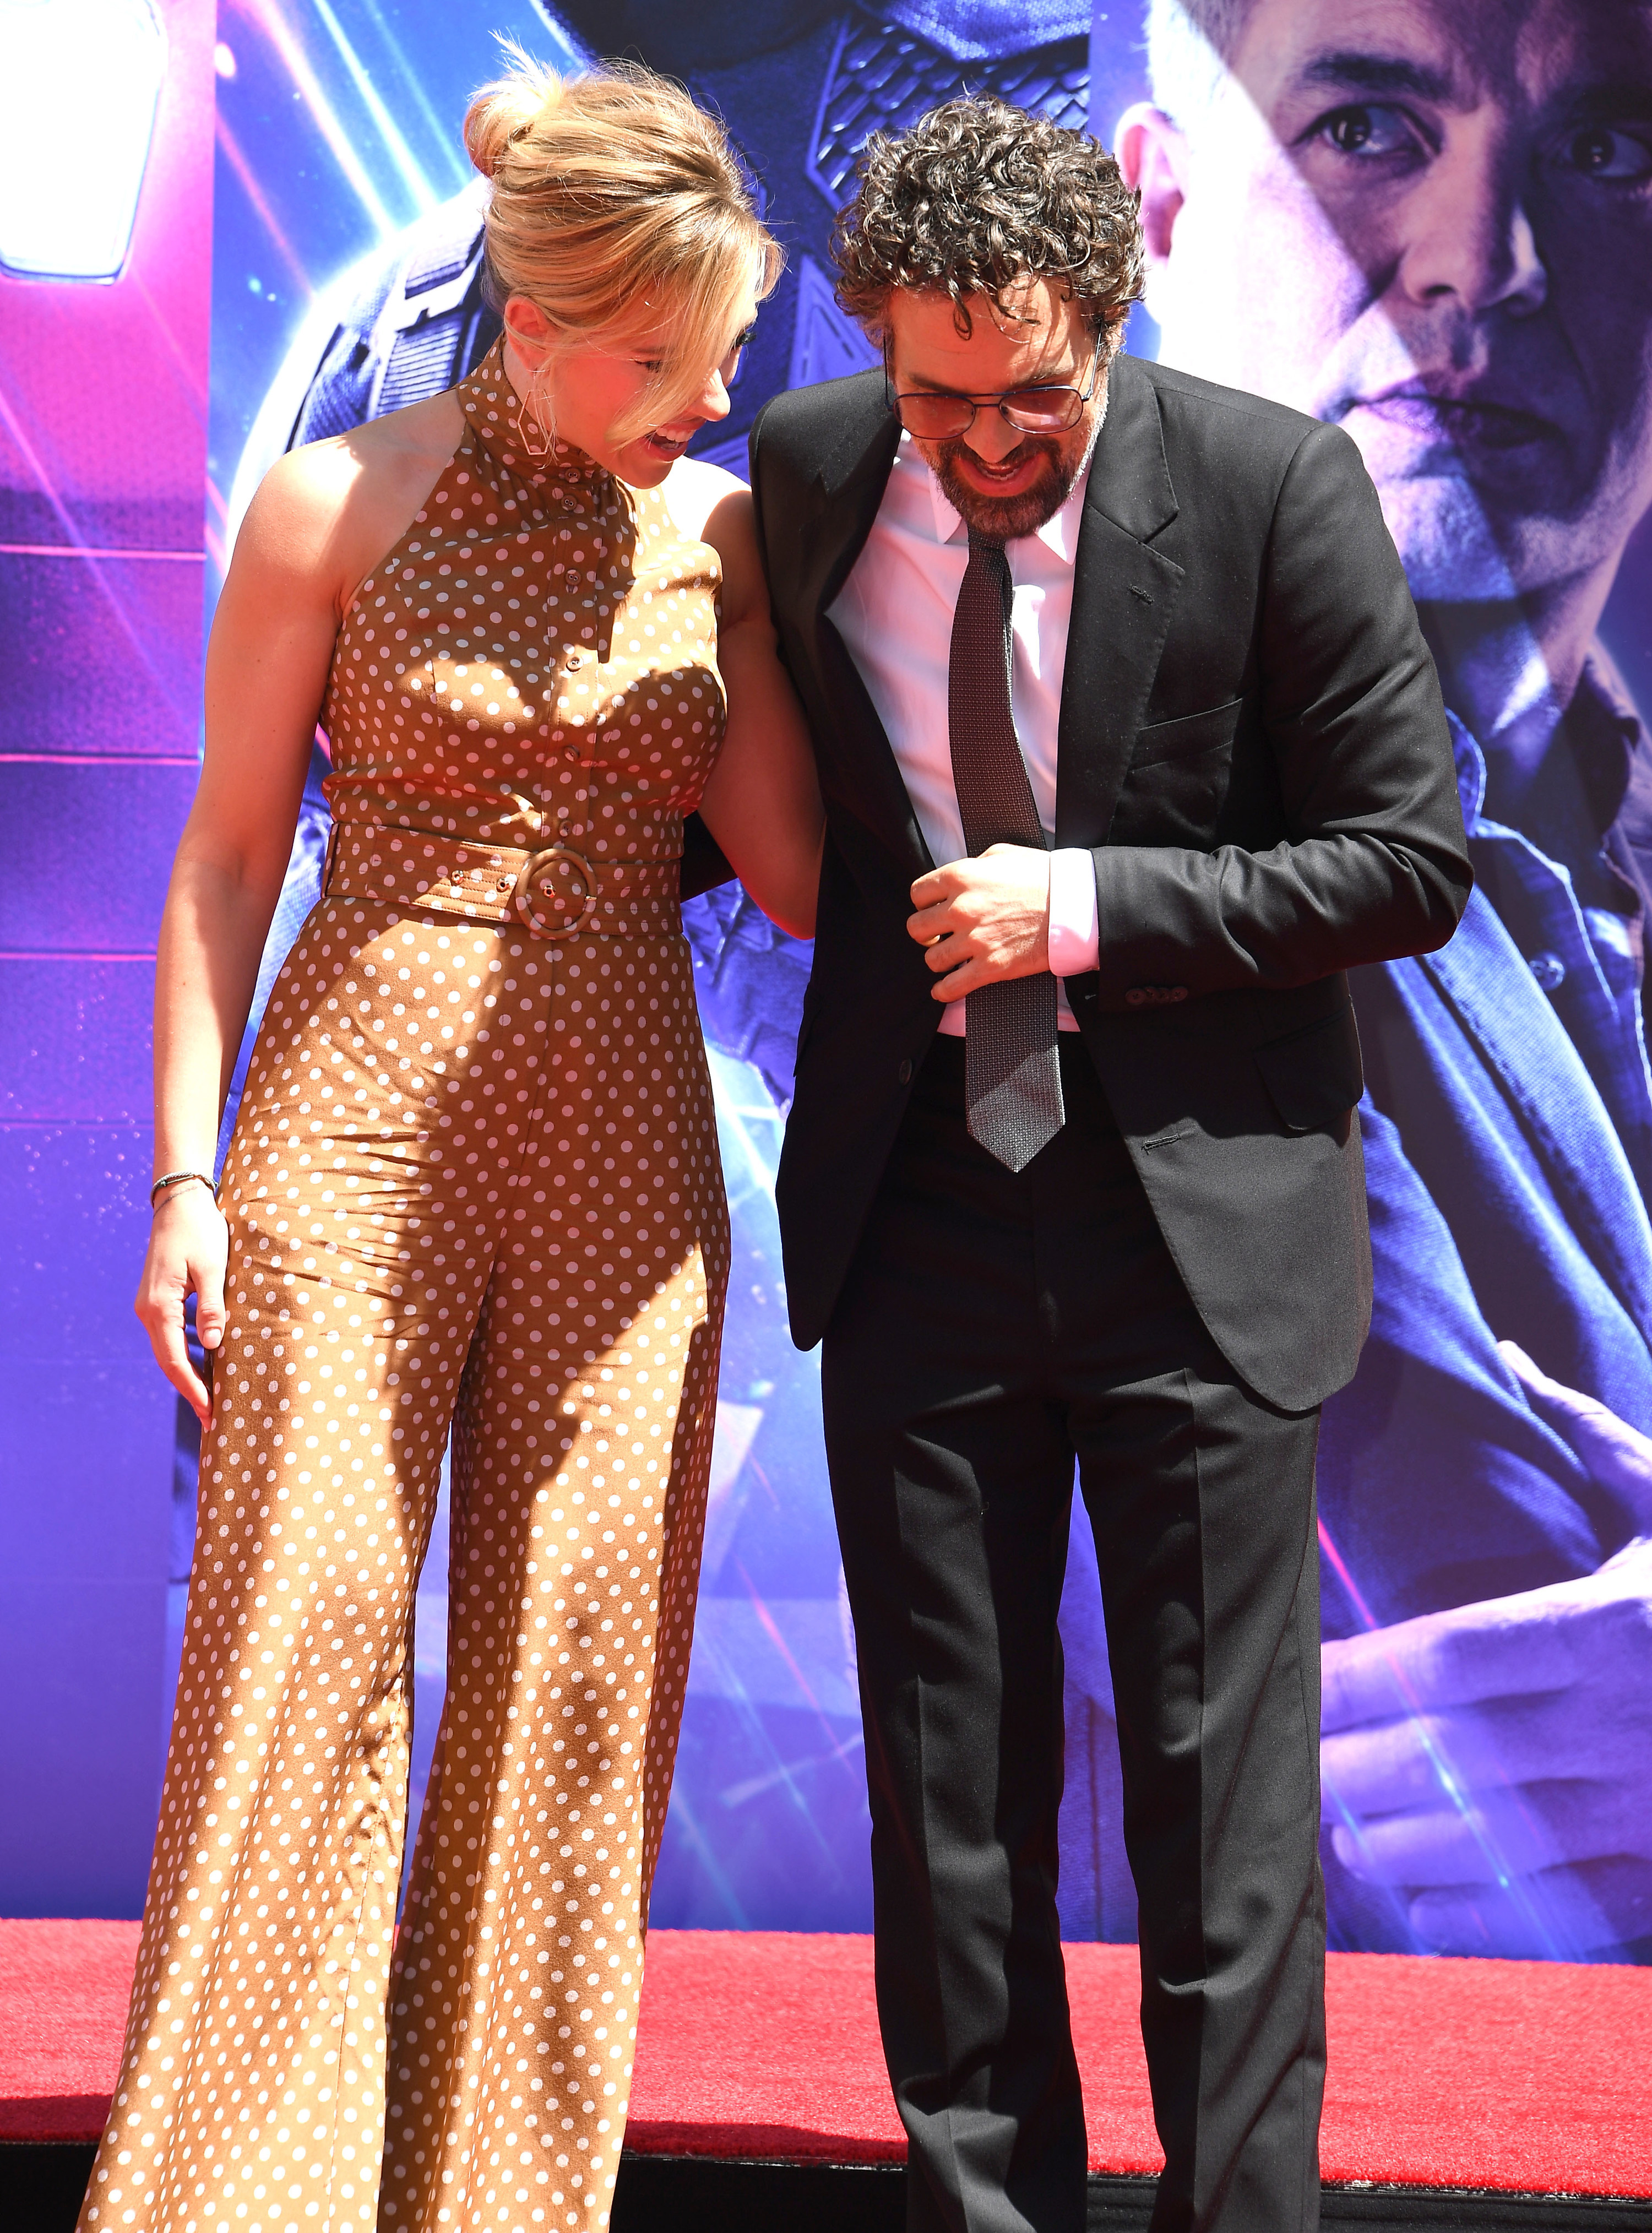 Scarlett with Mark Ruffalo. She wears a light brown polka dot jumpsuit with white dots. It has no sleeves, a high neck, flared trousers and a cinched in waist with a circular buckle.